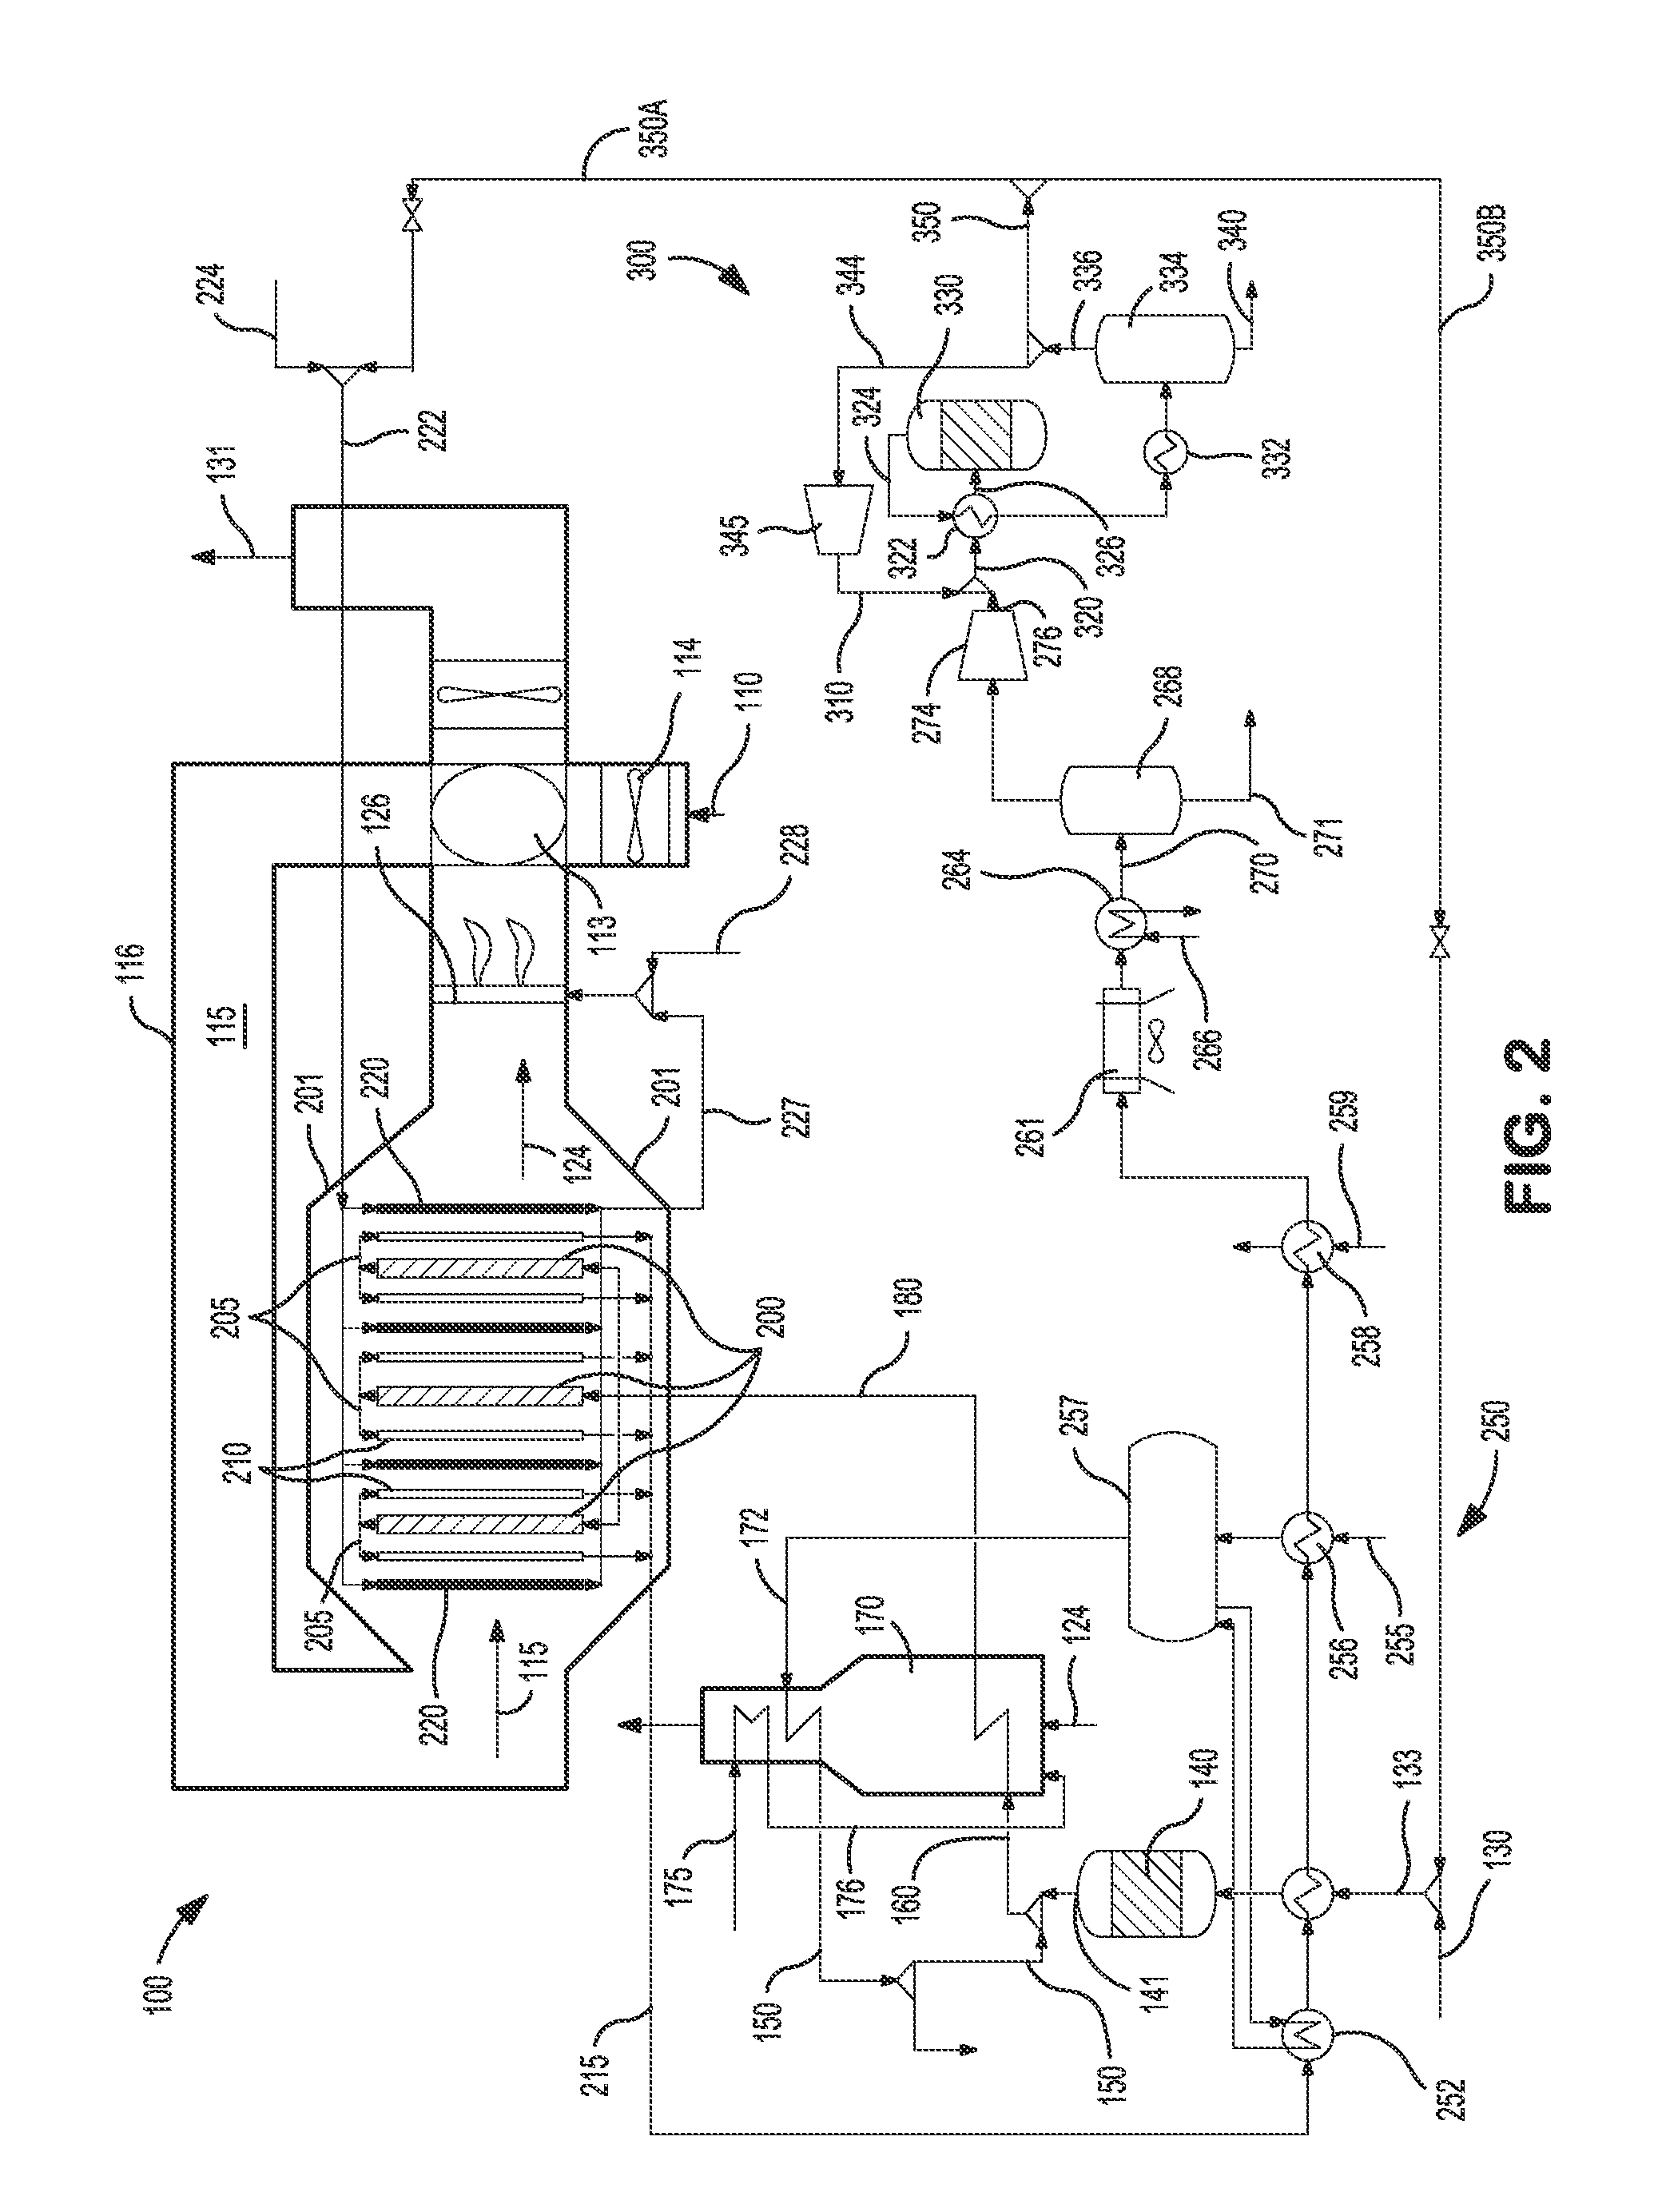 Method and system for producing a synthesis gas using an oxygen transport membrane based reforming system with secondary reforming and auxiliary heat source